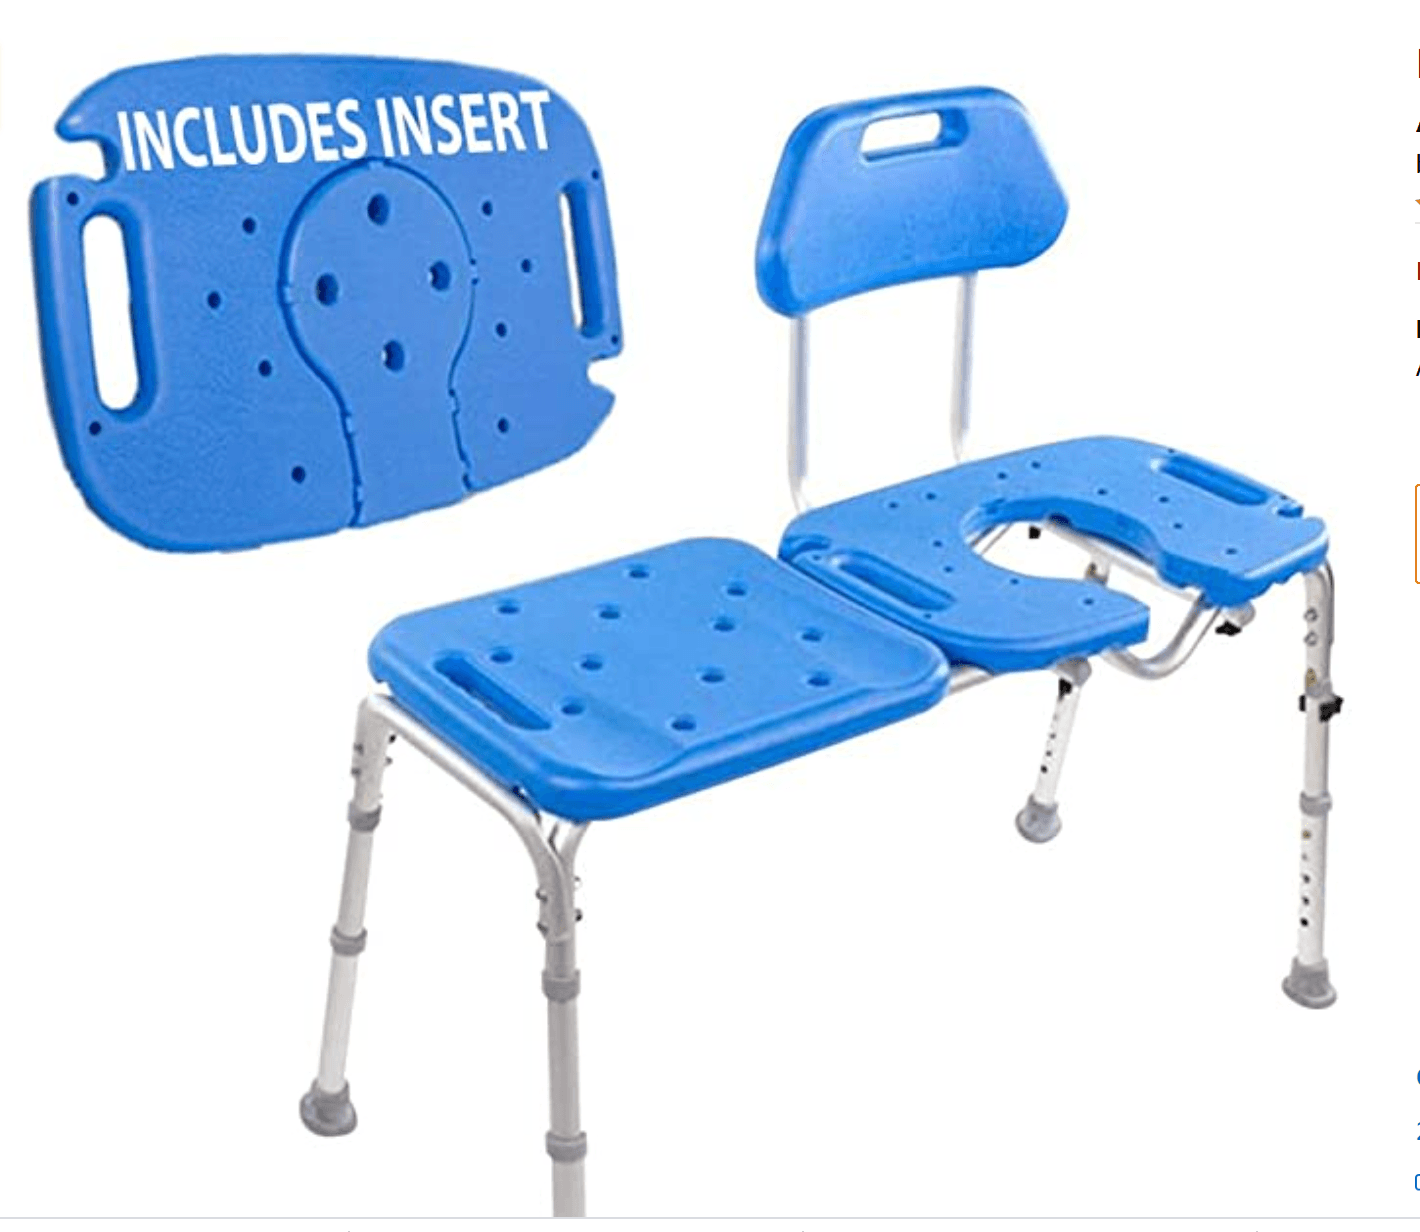 ALL-ACCESS Bath Transfer Bench with CUTOUT - Removable Insert